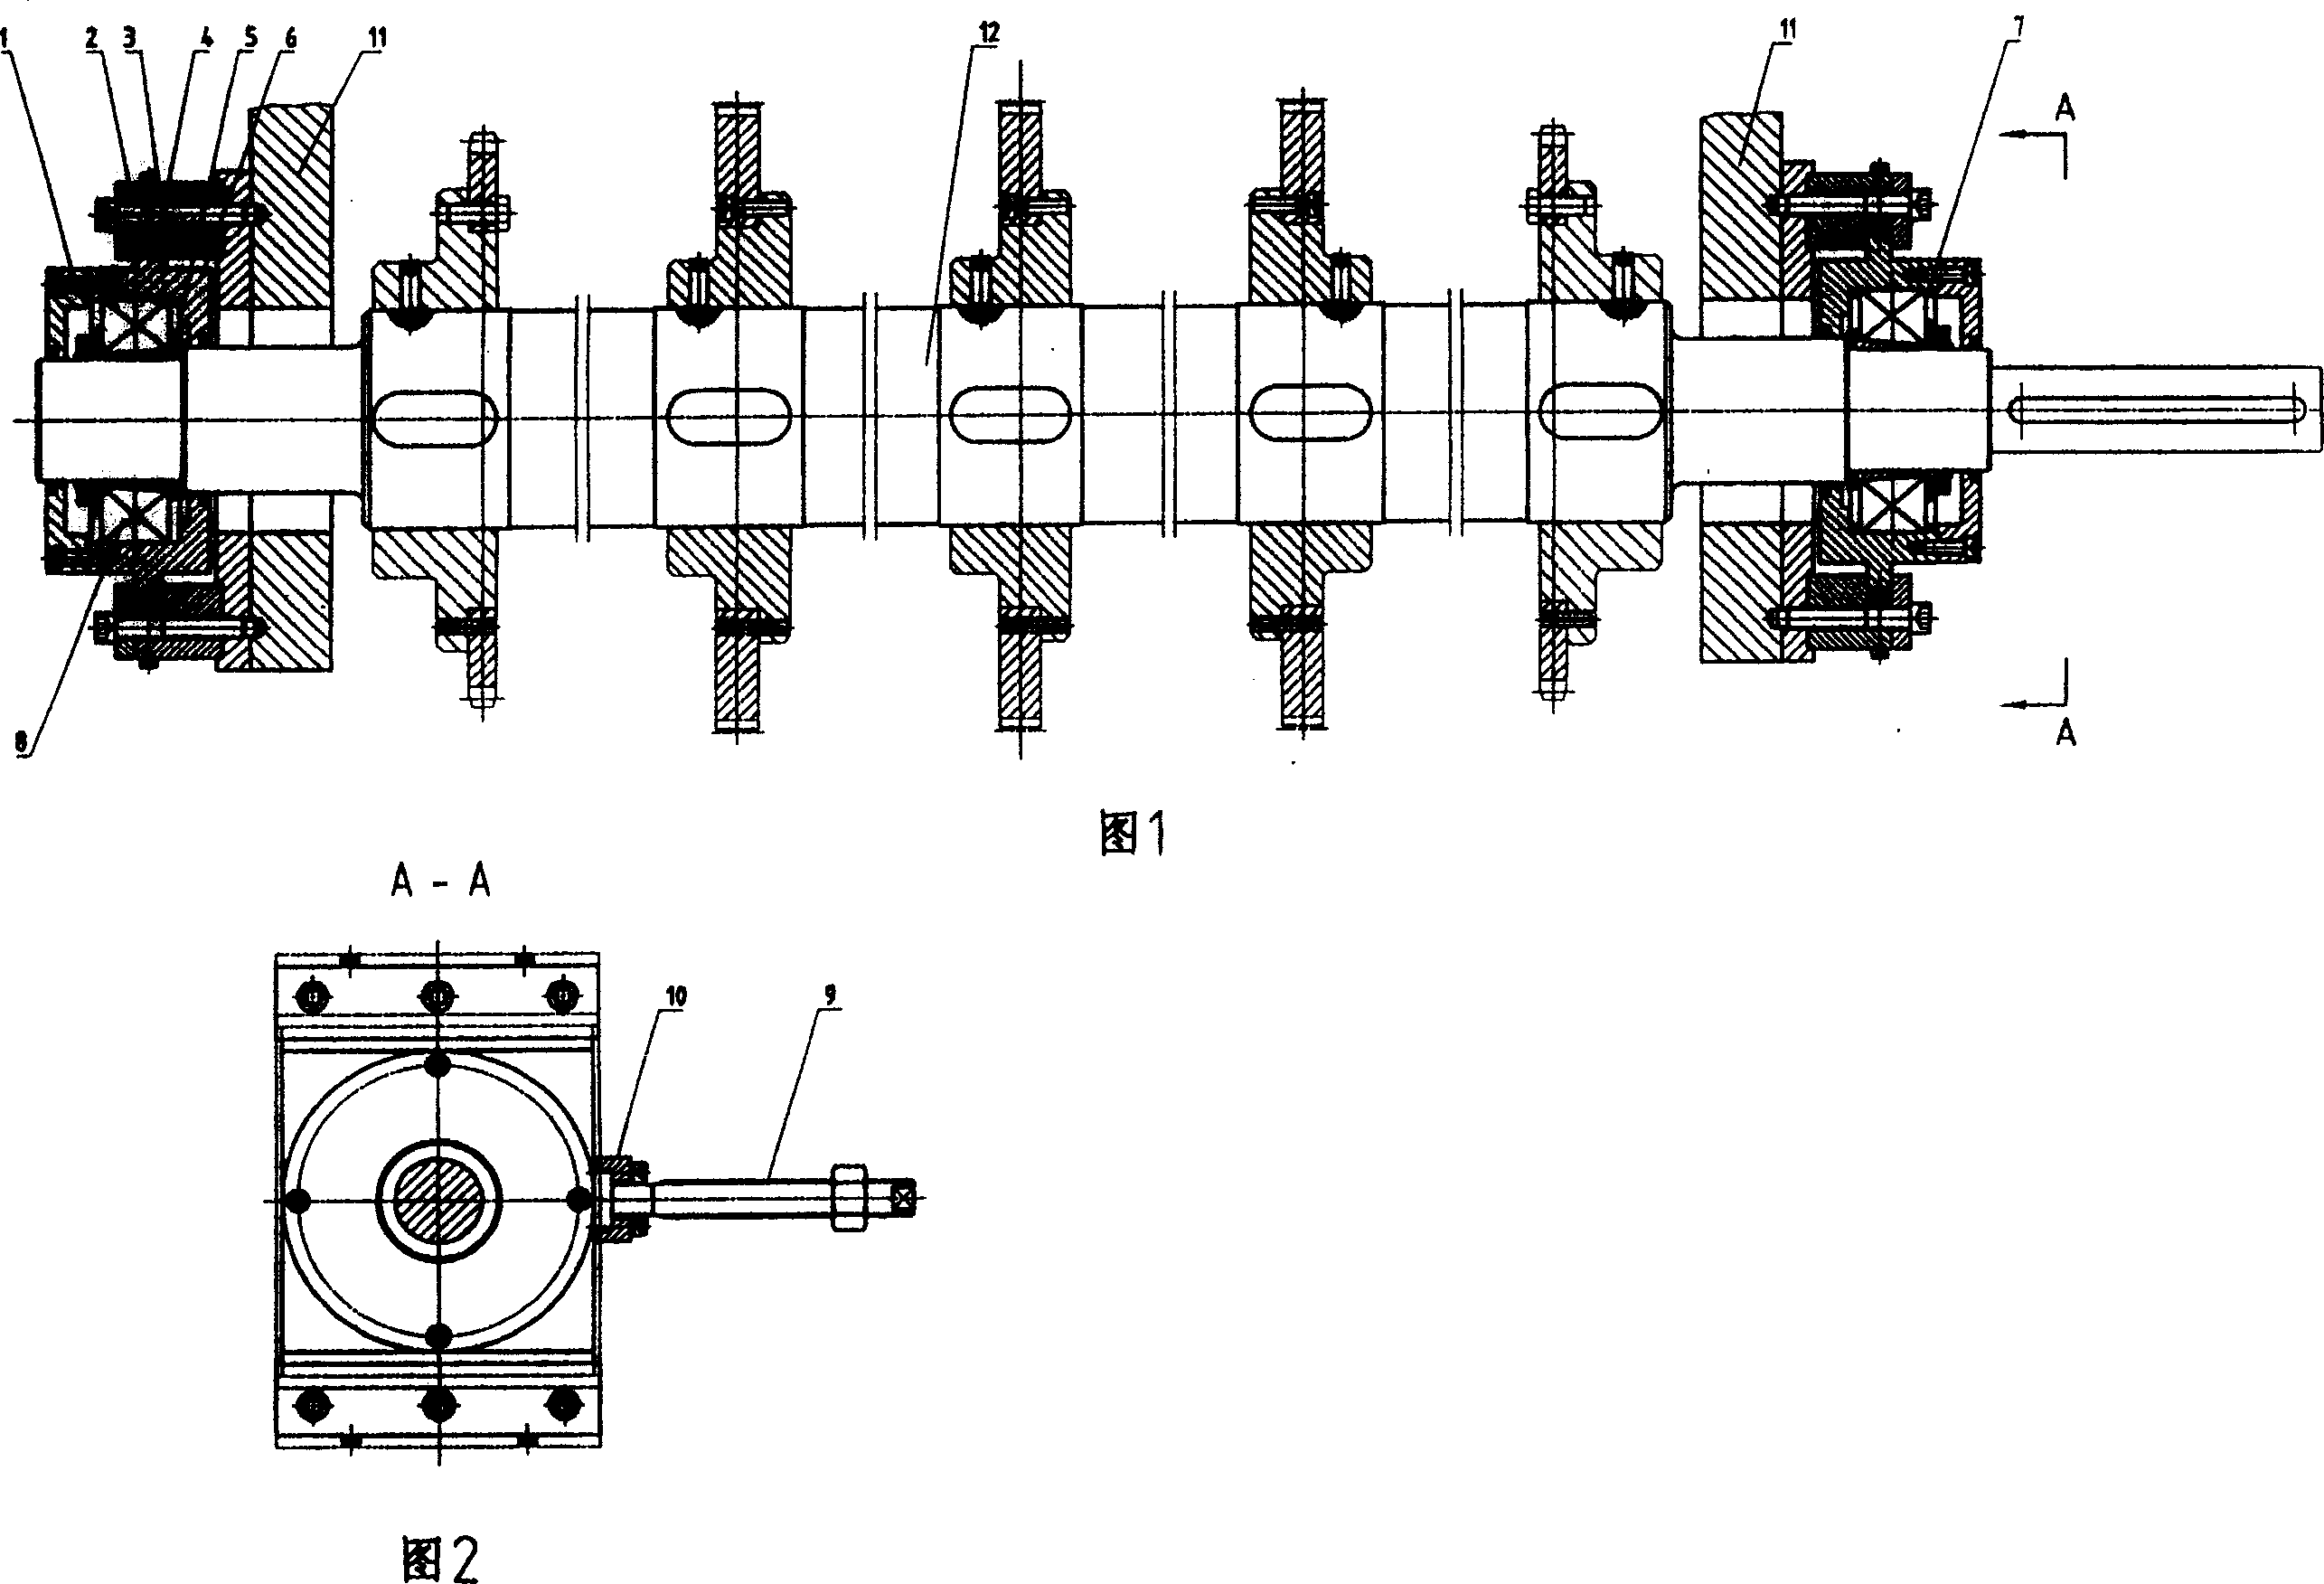 Feed shaft bearing block structure of flat pressing continuous press